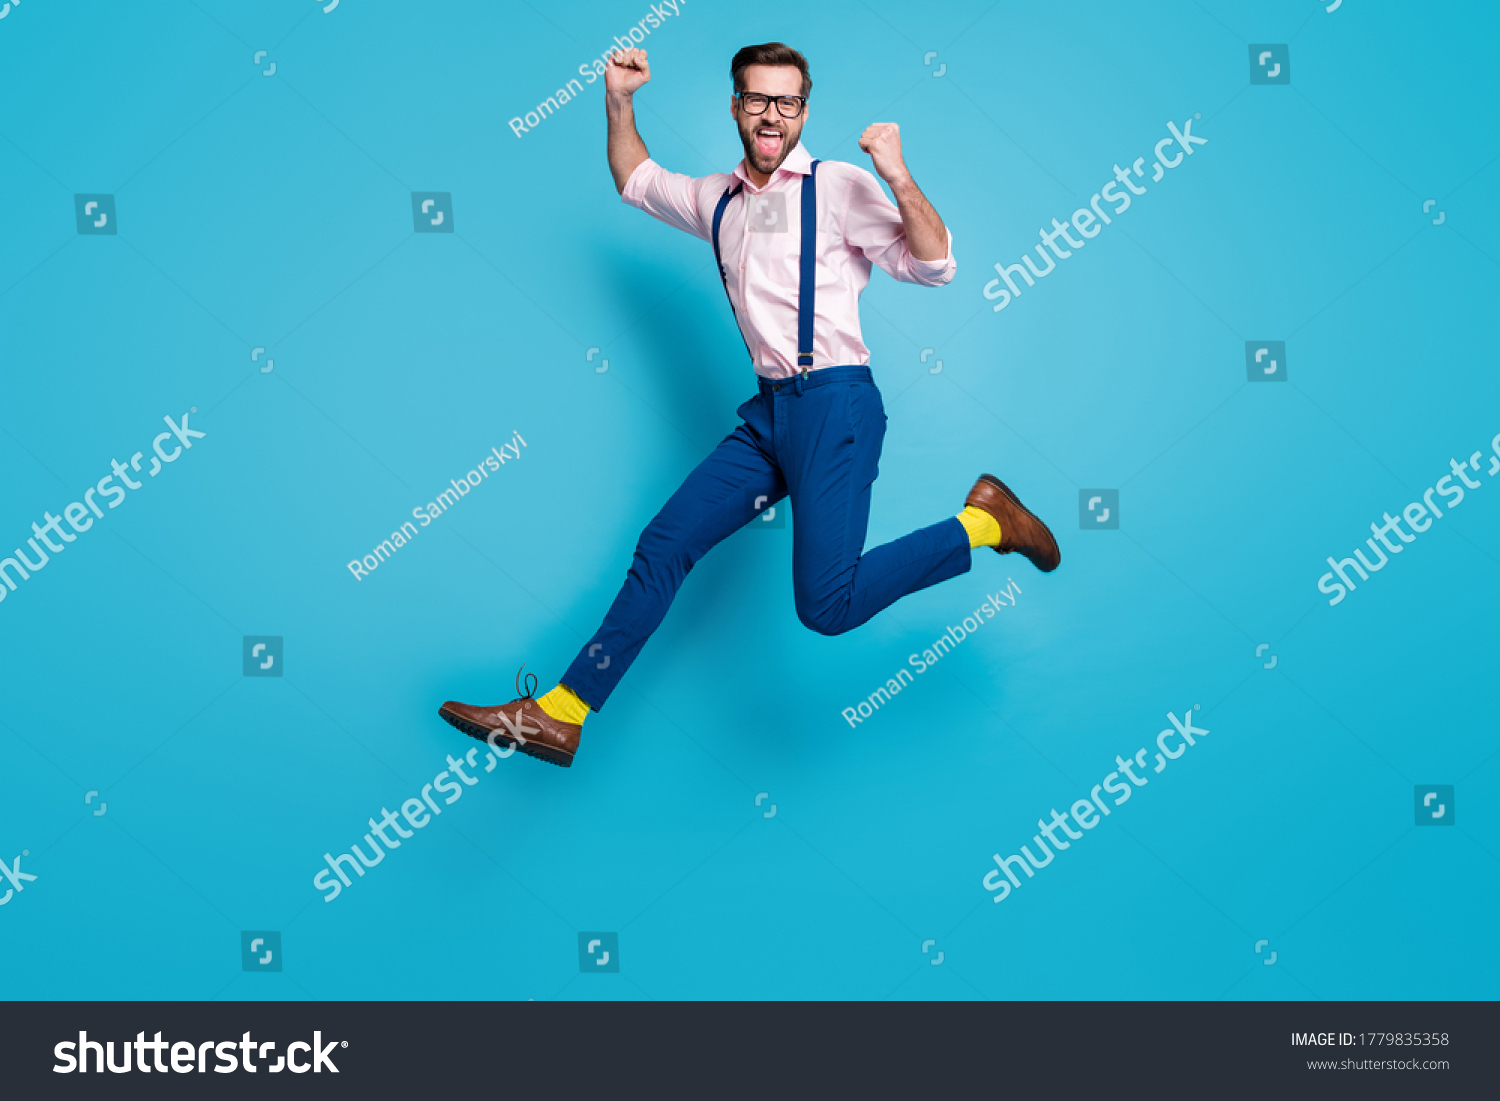 Full body profile photo of handsome man jump high up running competition work worker raise fists first place winner wear specs shirt suspenders pants boots isolated blue color background #1779835358